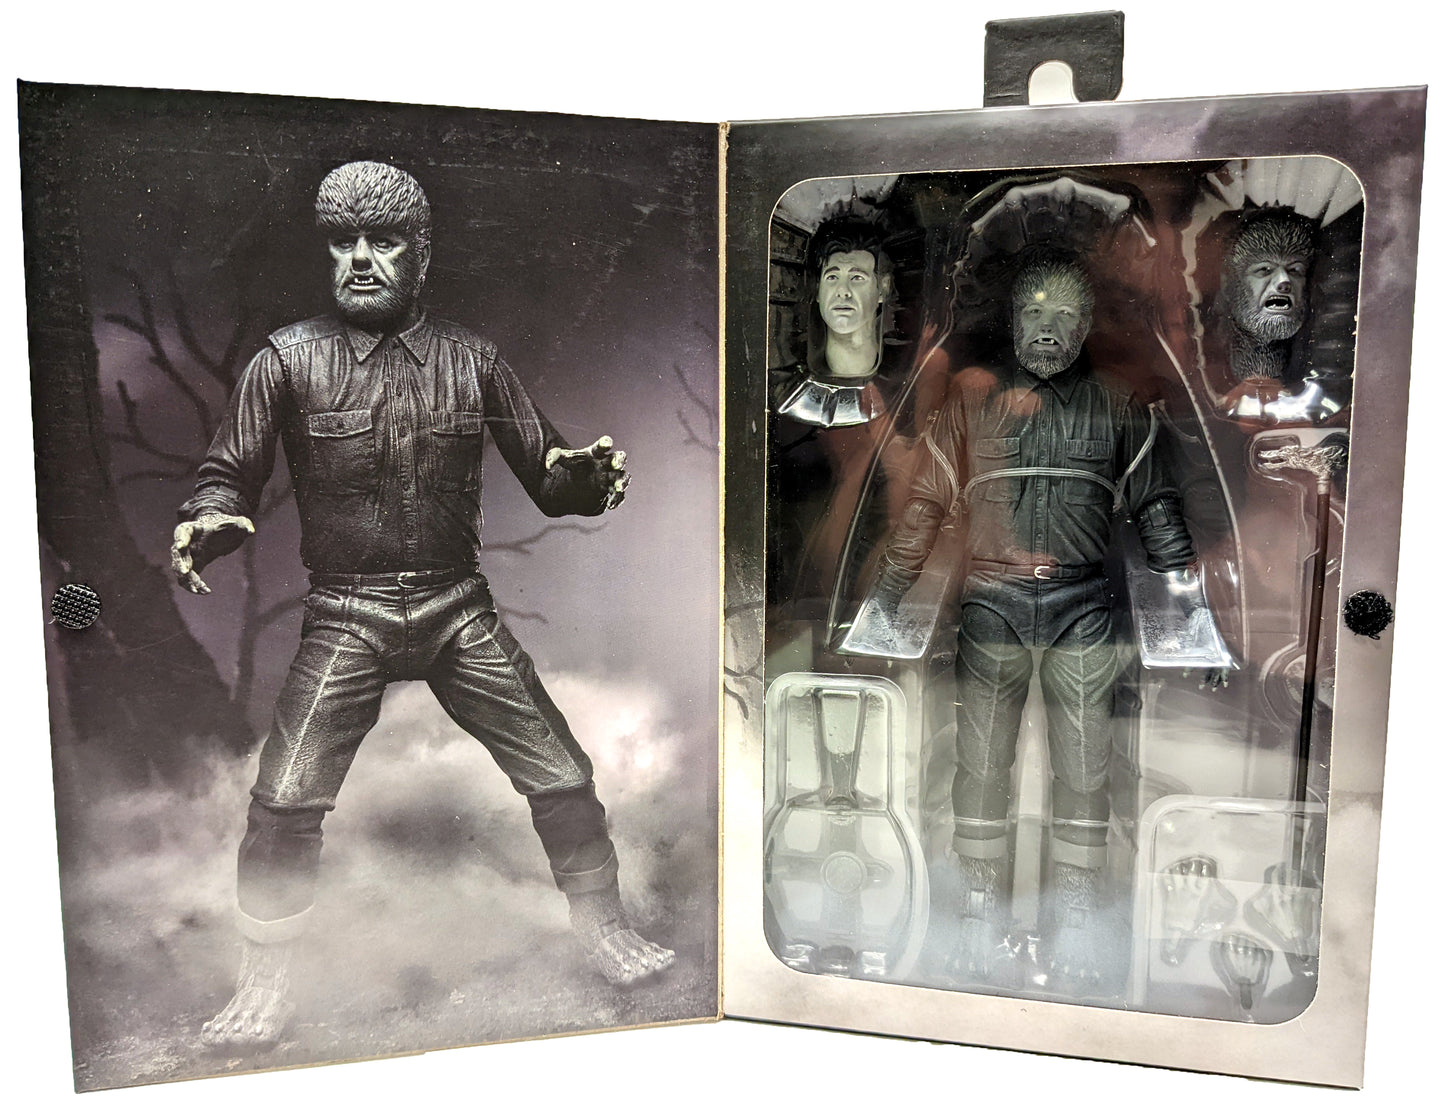 NECA - Universal Monsters - The Wolf Man - 7-Inch Scale Action Figure